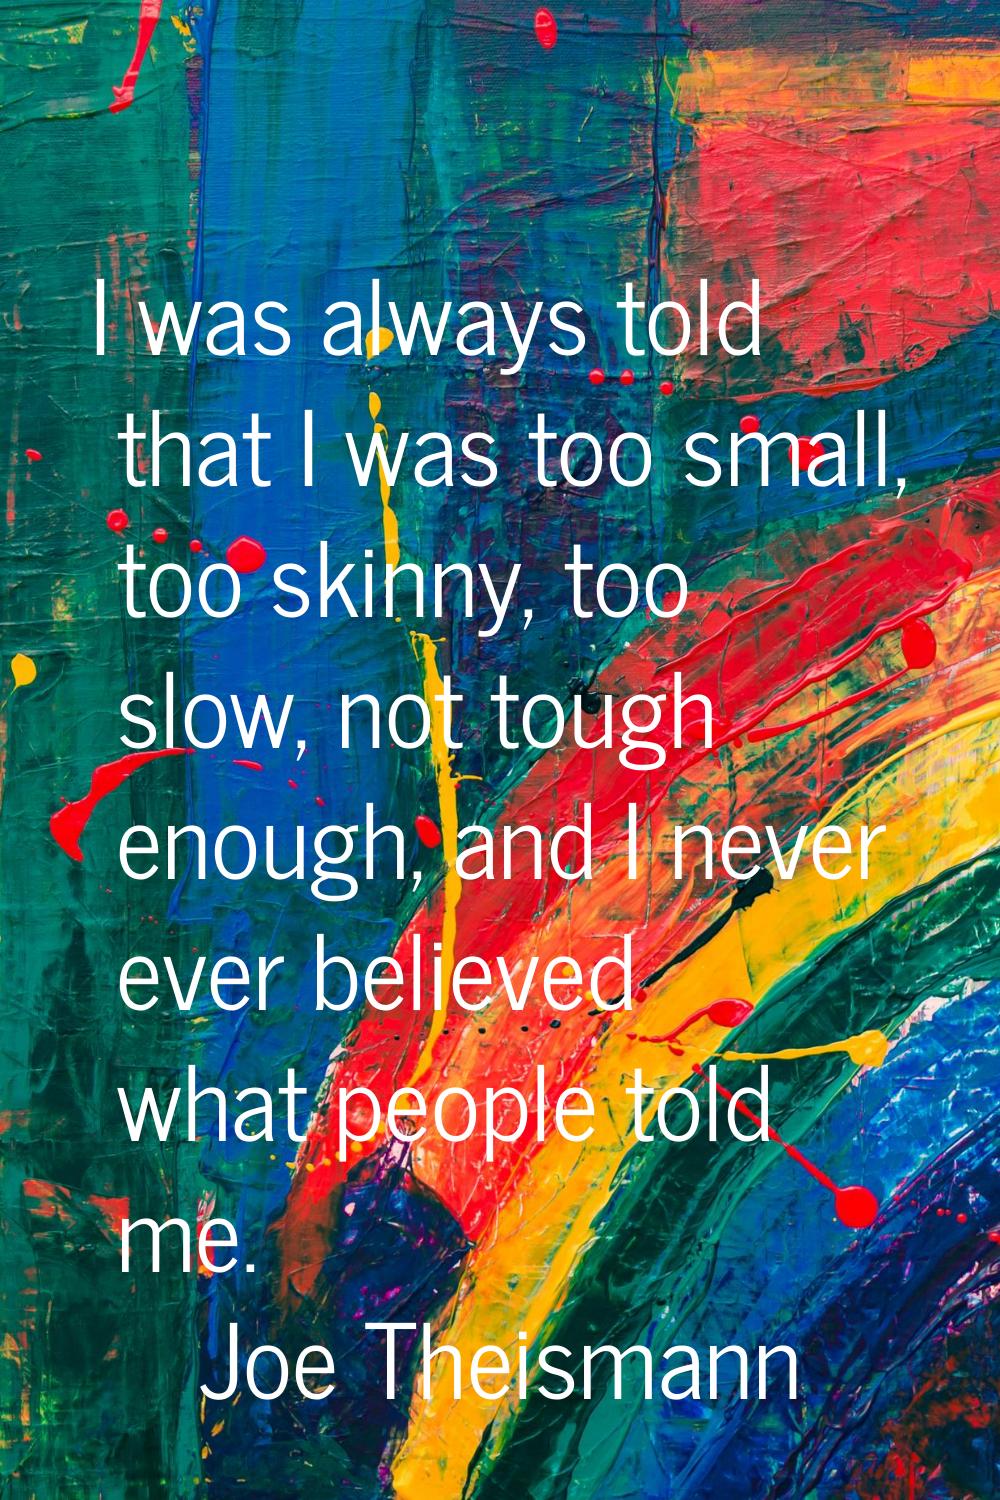 I was always told that I was too small, too skinny, too slow, not tough enough, and I never ever be